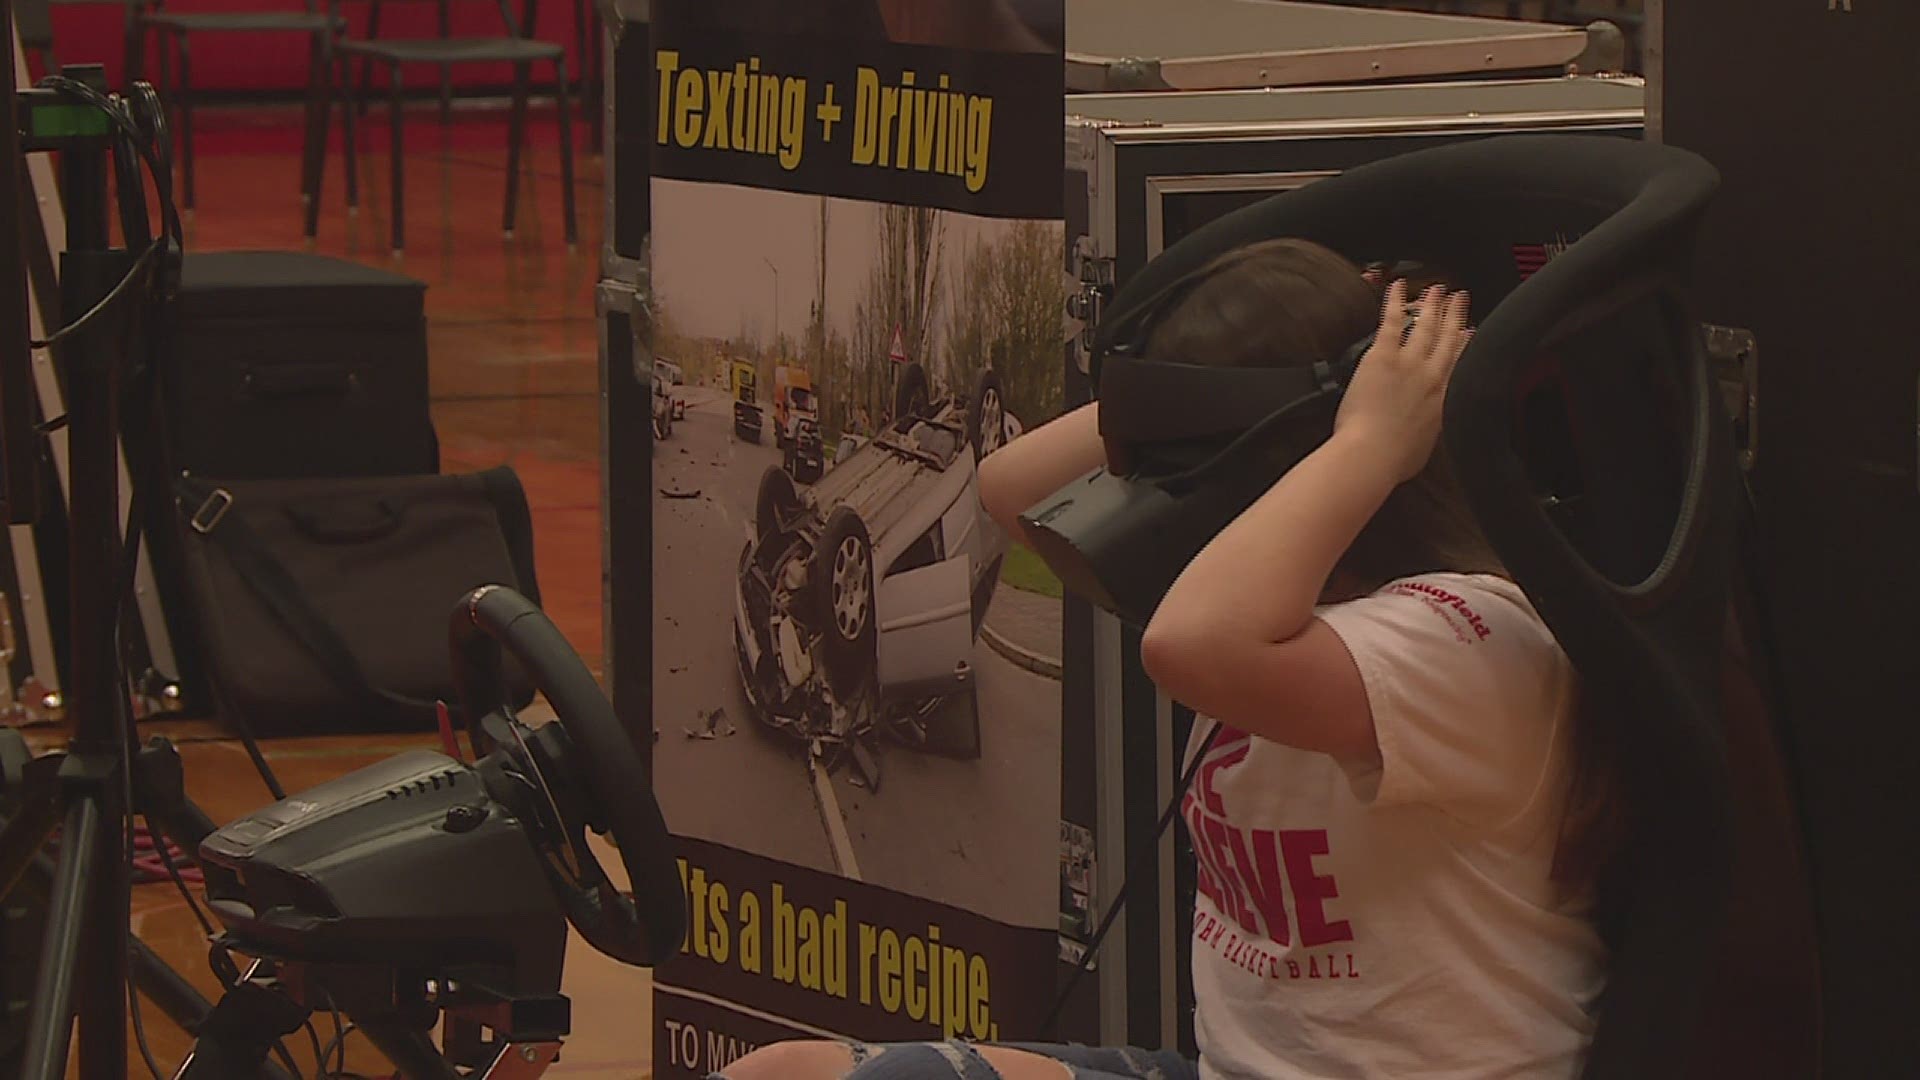 Students at United Senior High School use an impaired driving simulator just one day before their prom.